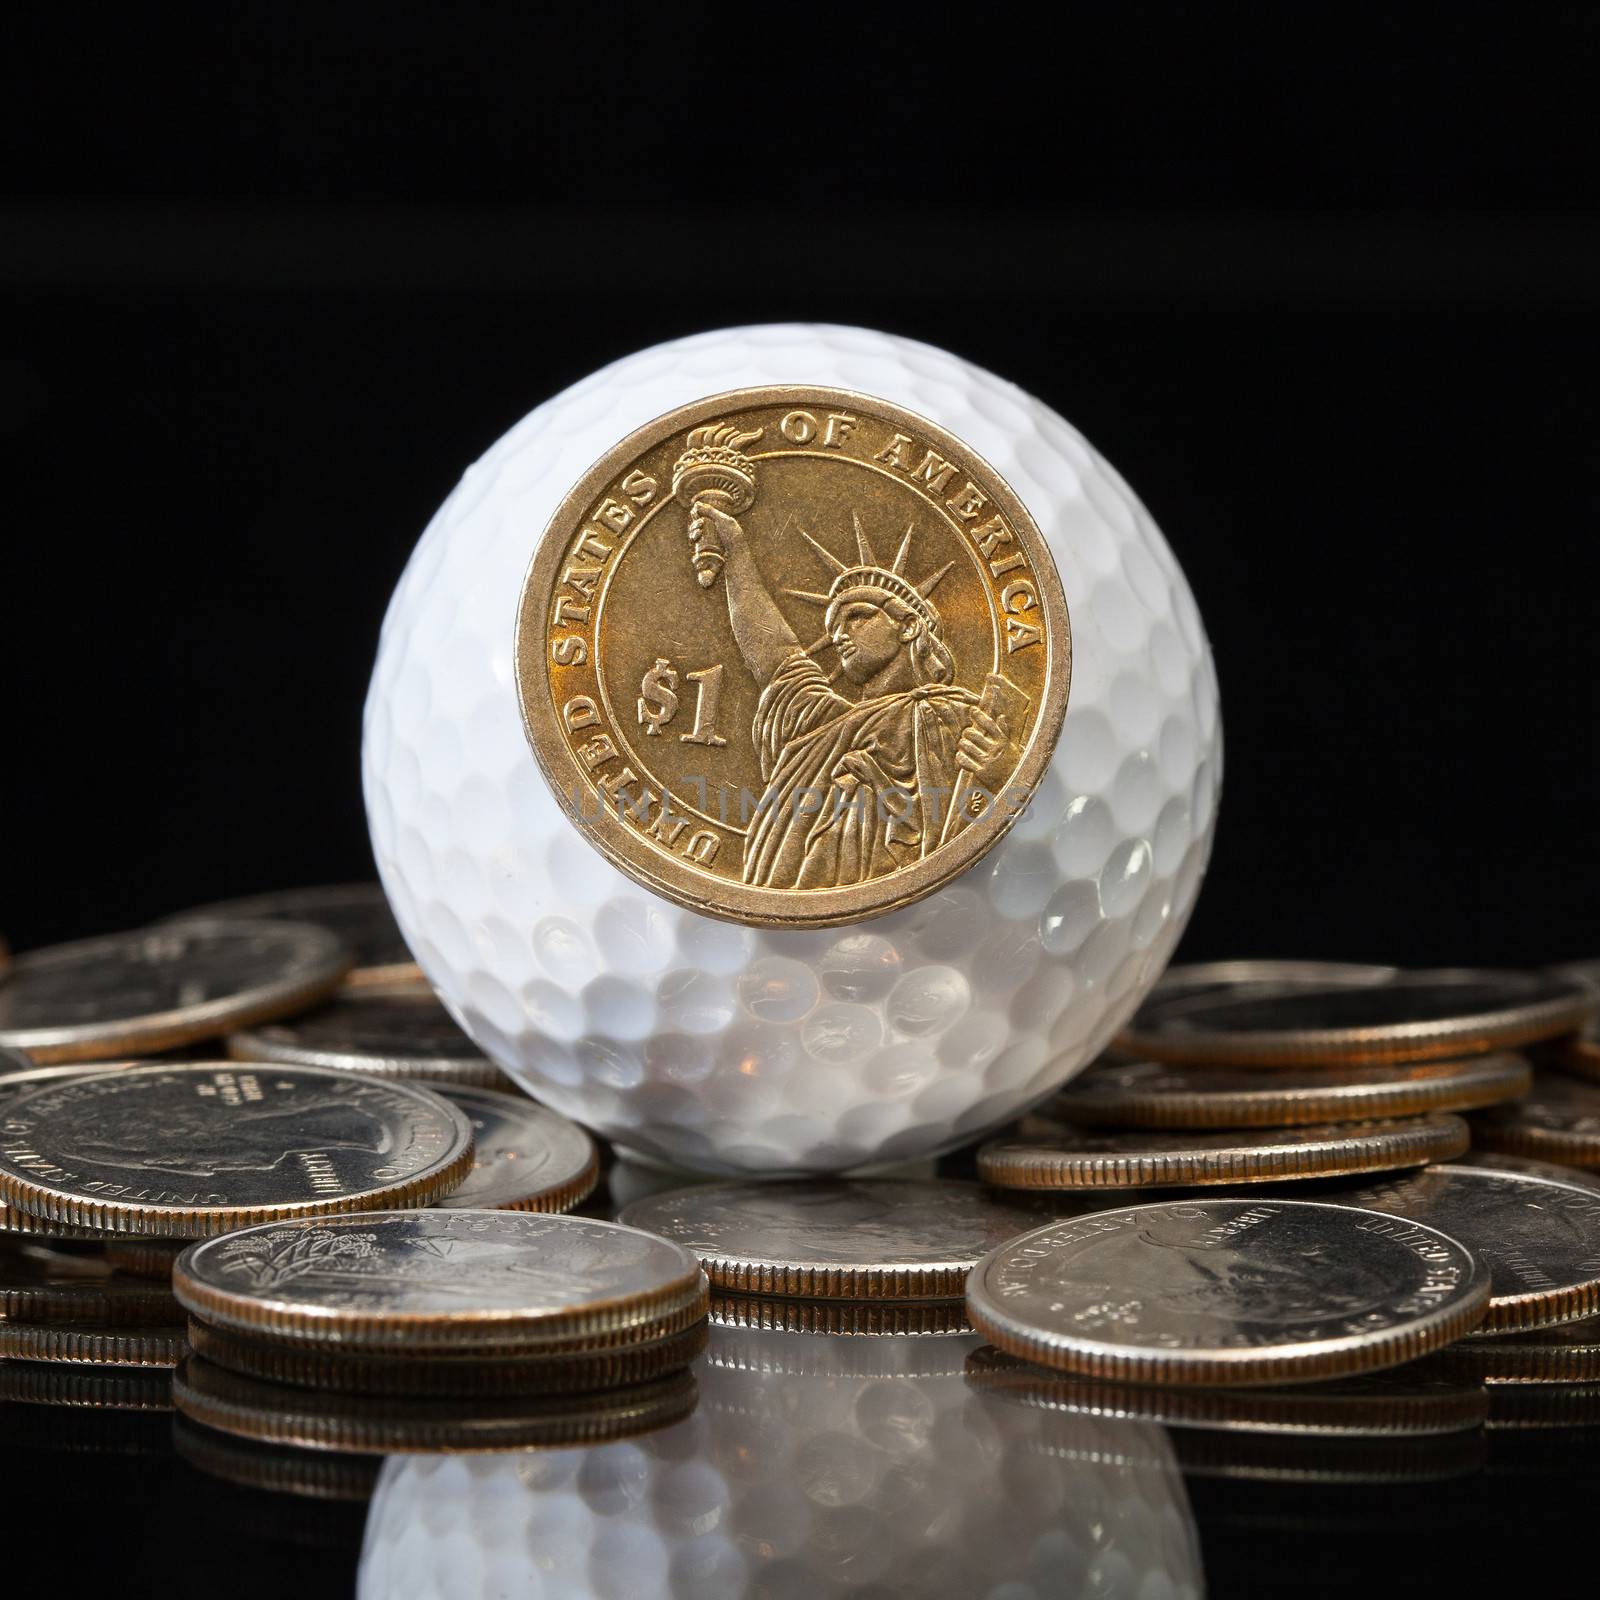 White golf ball and different U.S. dollar coins